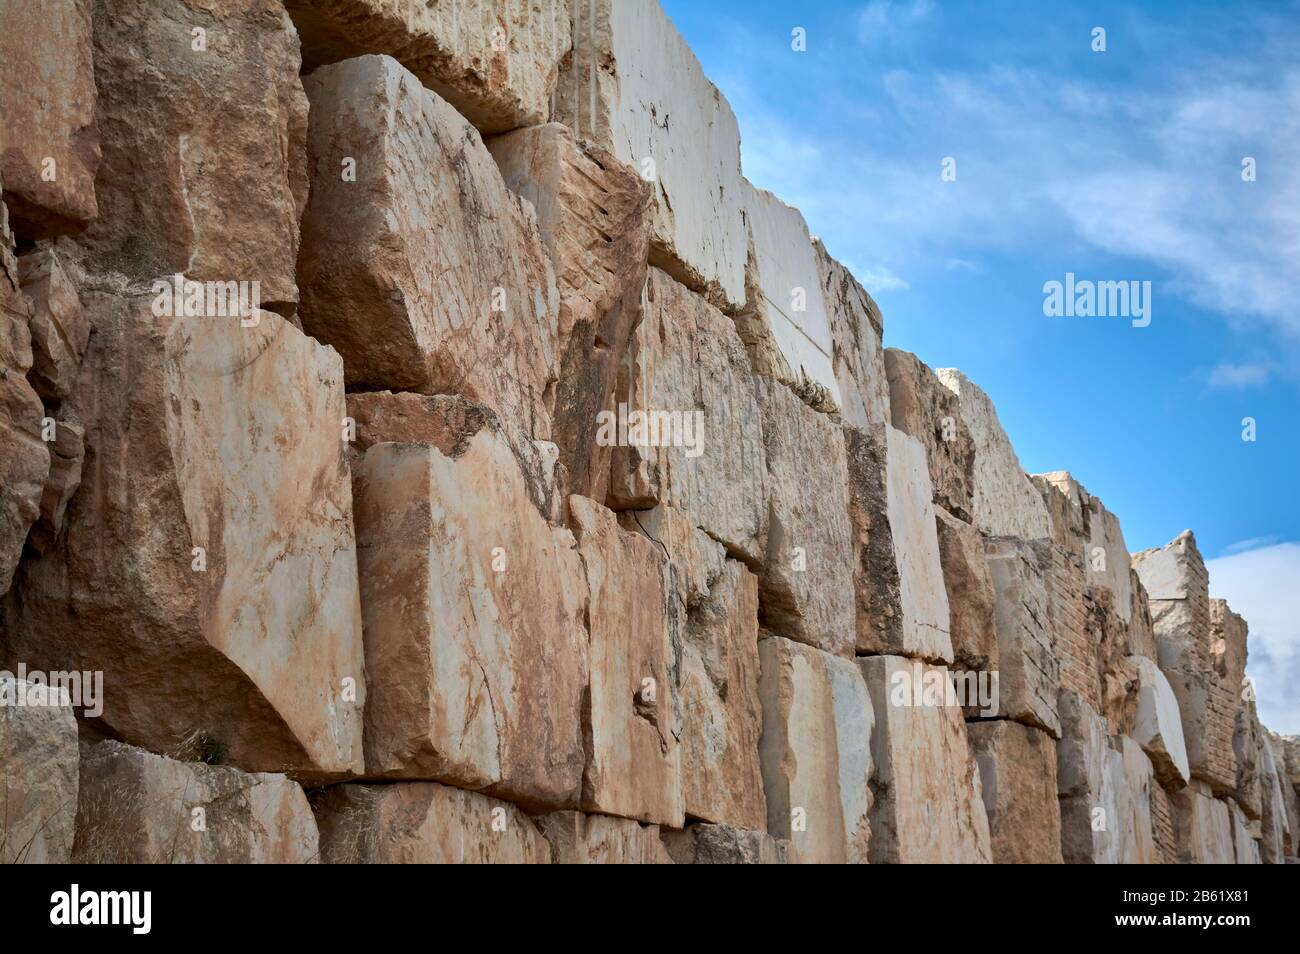 detail of a part of a wall of marble stones cut and abandoned in a quarry Stock Photo